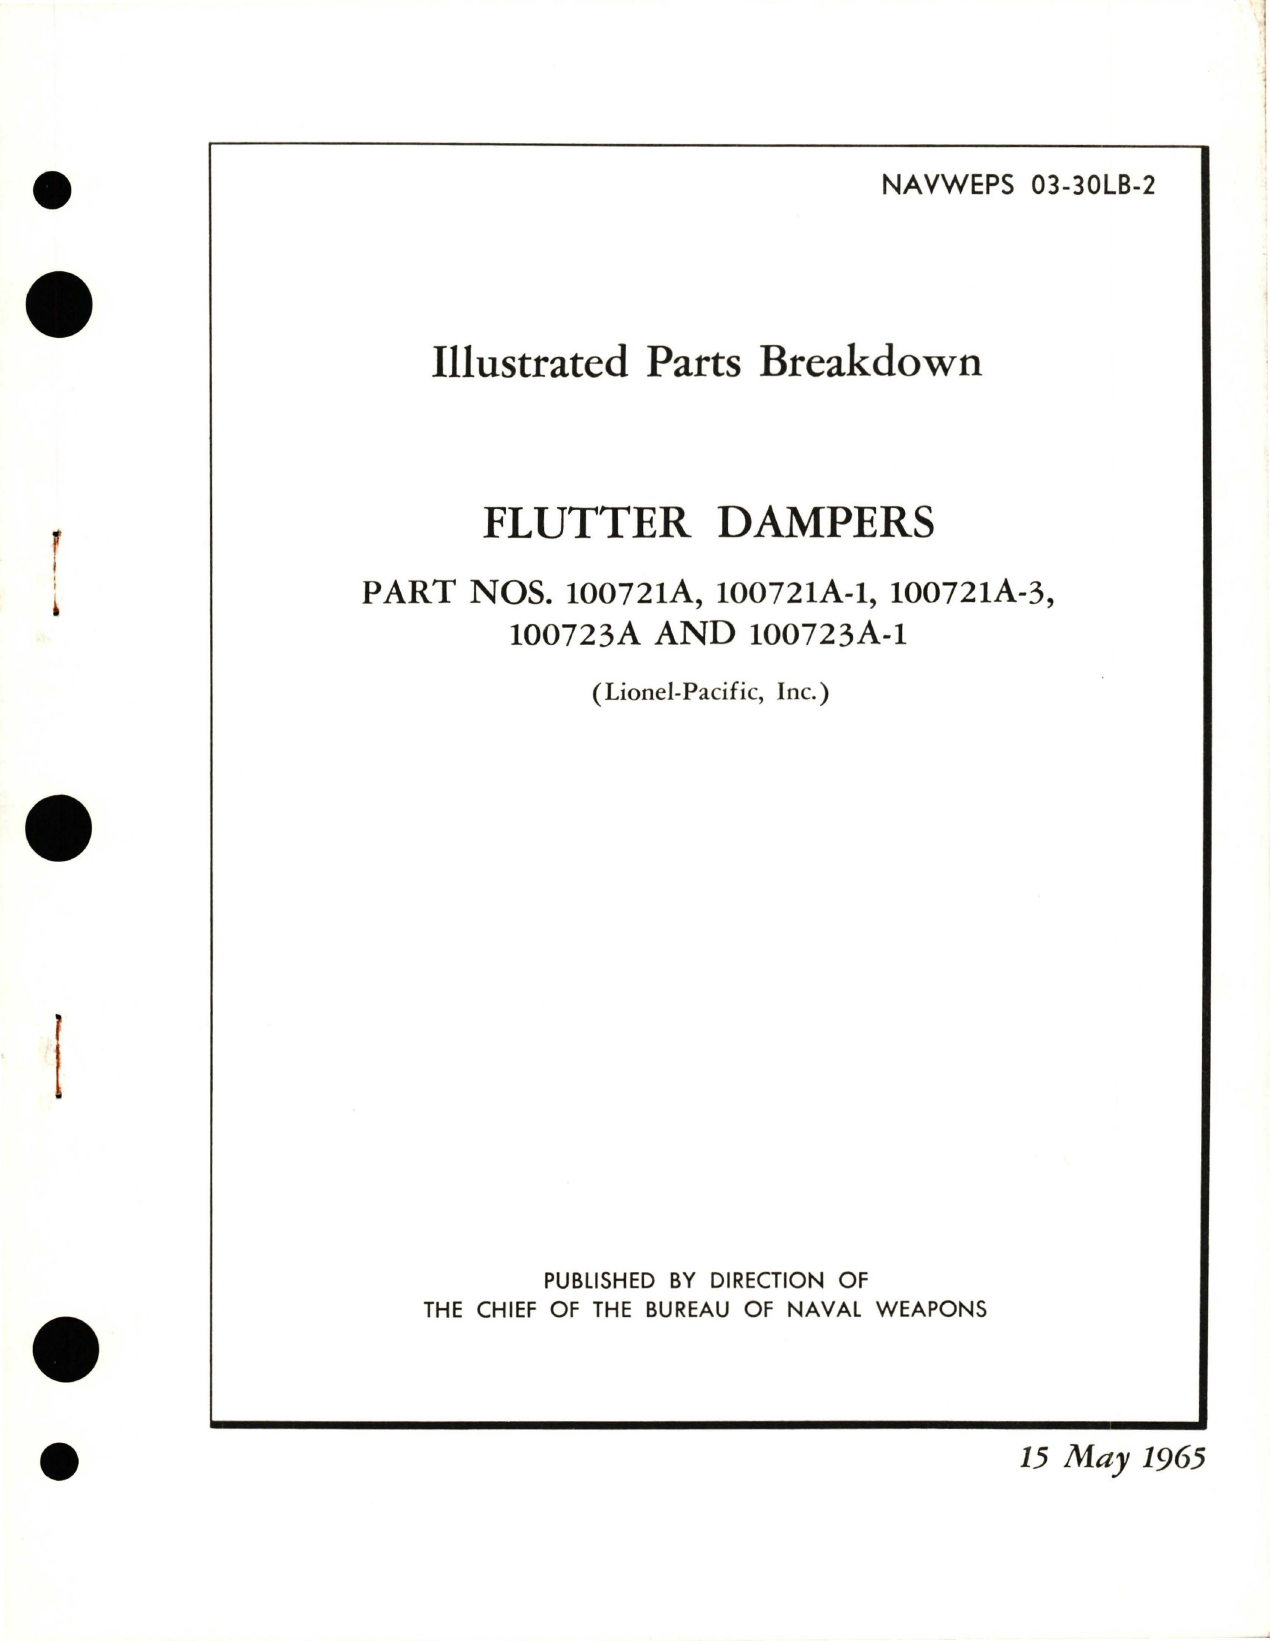 Sample page 1 from AirCorps Library document: Illustrated Parts Breakdown for Flutter Dampers - Parts 100721A, 100721A-1, 100721A-3, 100723A, and 100723A-1